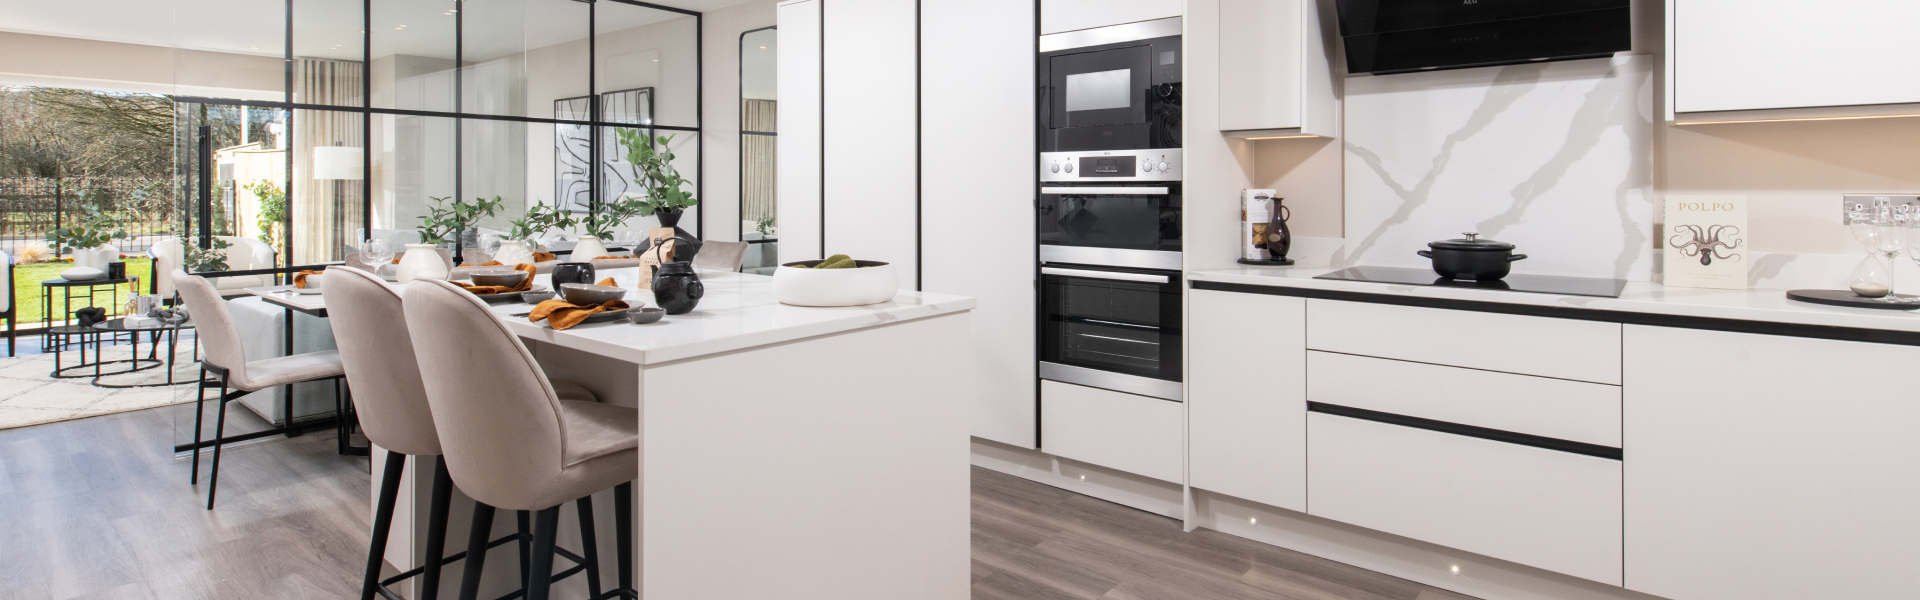 <h1 class="news-banner__title">What inspired the show home at Greenholme Mews?</h1>